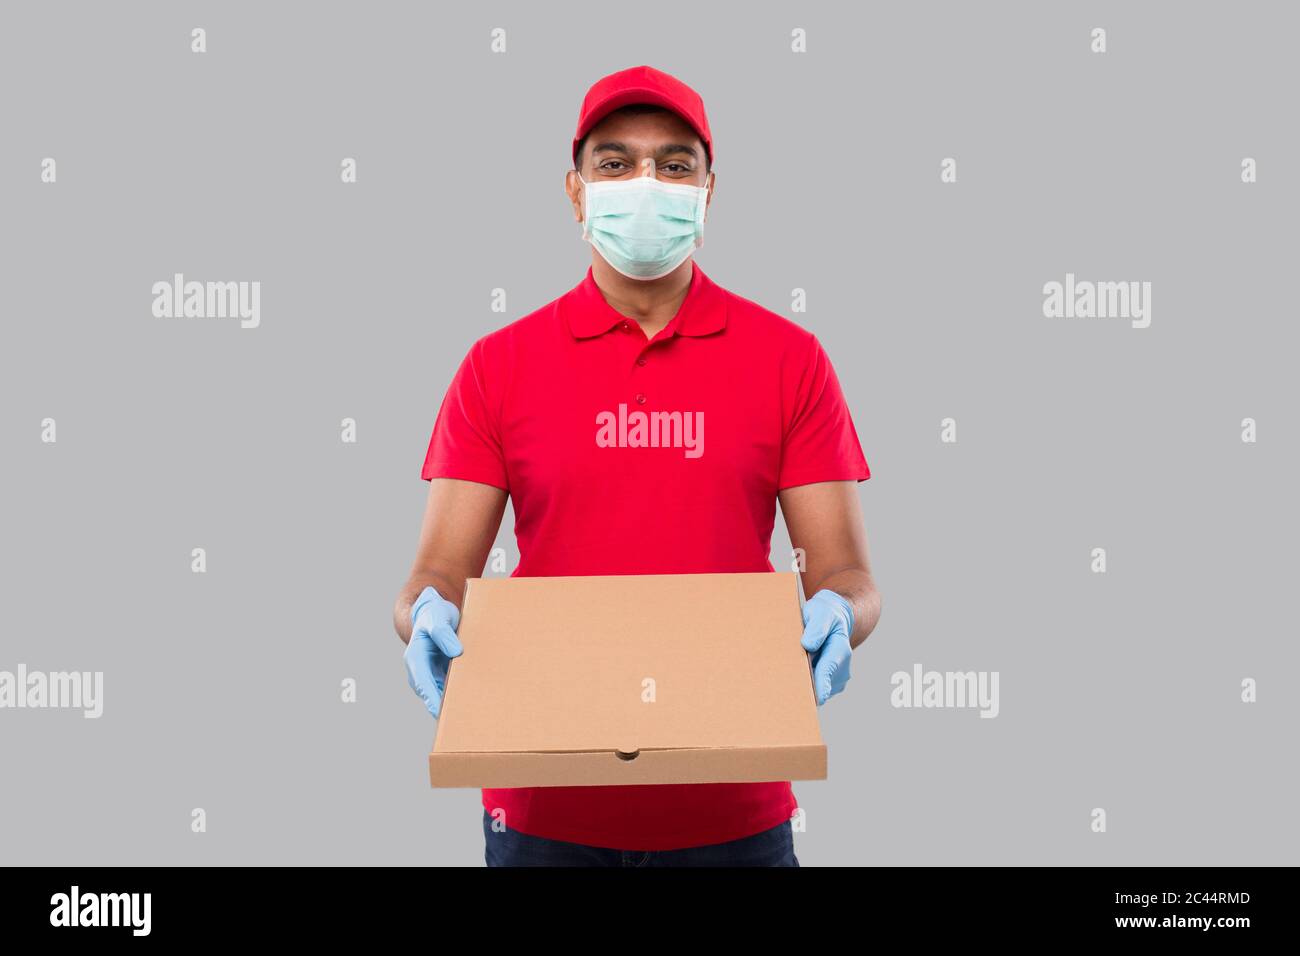 Delivery Man Pizza Box in Hands Wearing Medical Mask and Gloves Isolated. Red Tshirt Indian Delivery Boy. Stock Photo